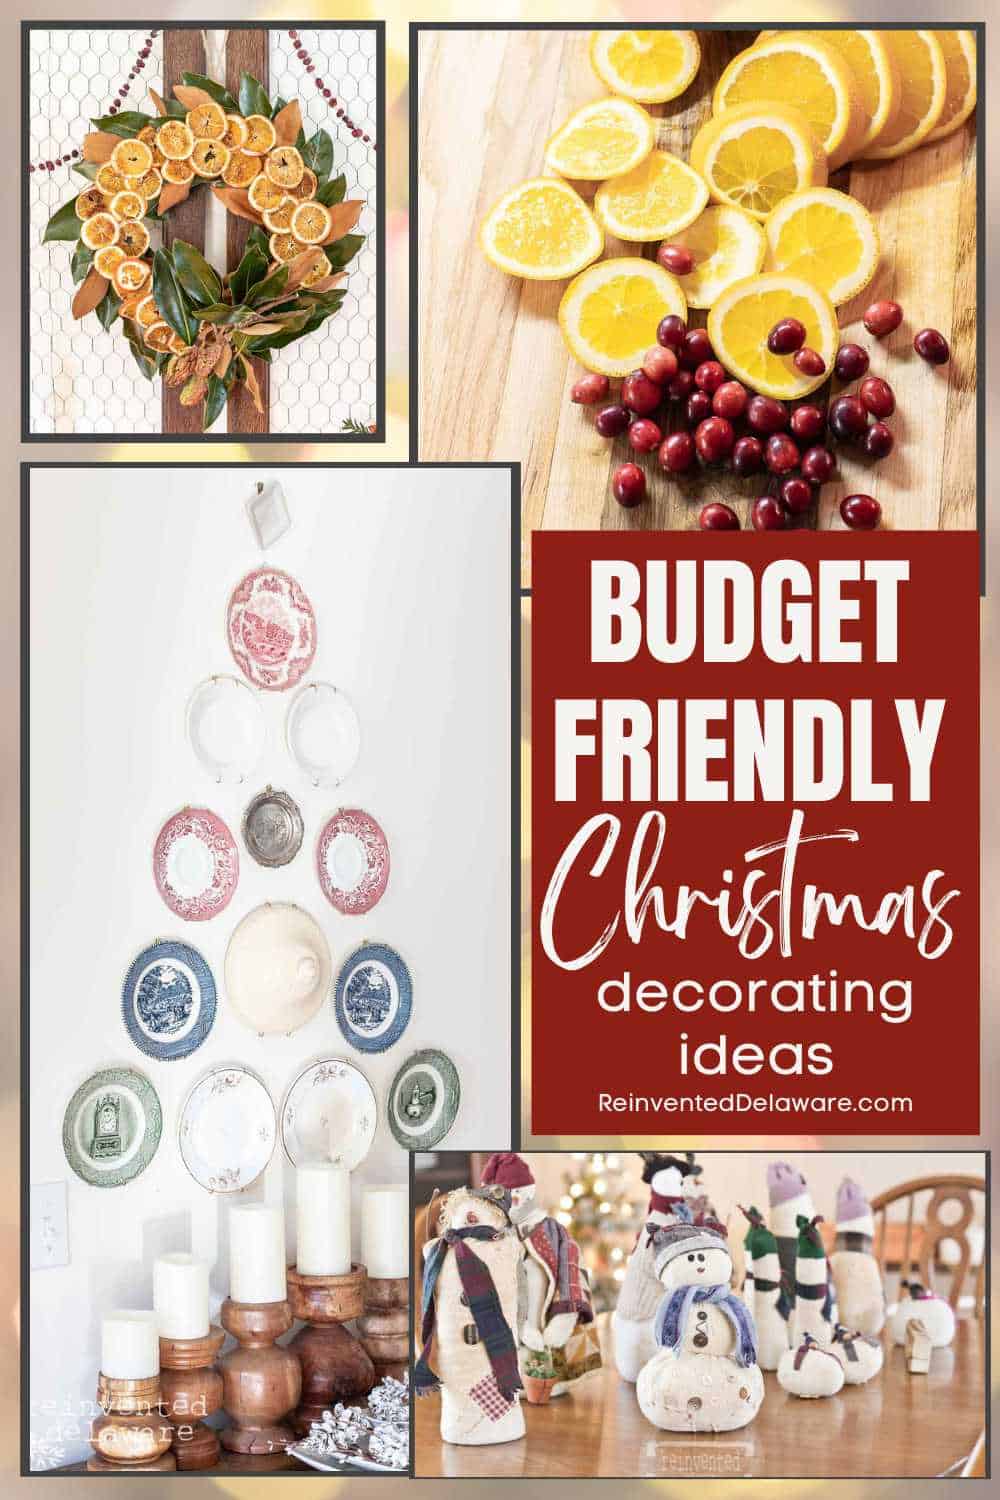 Pinterest graphic with text overly "Budget Friendly Christmas Decorating ideas"